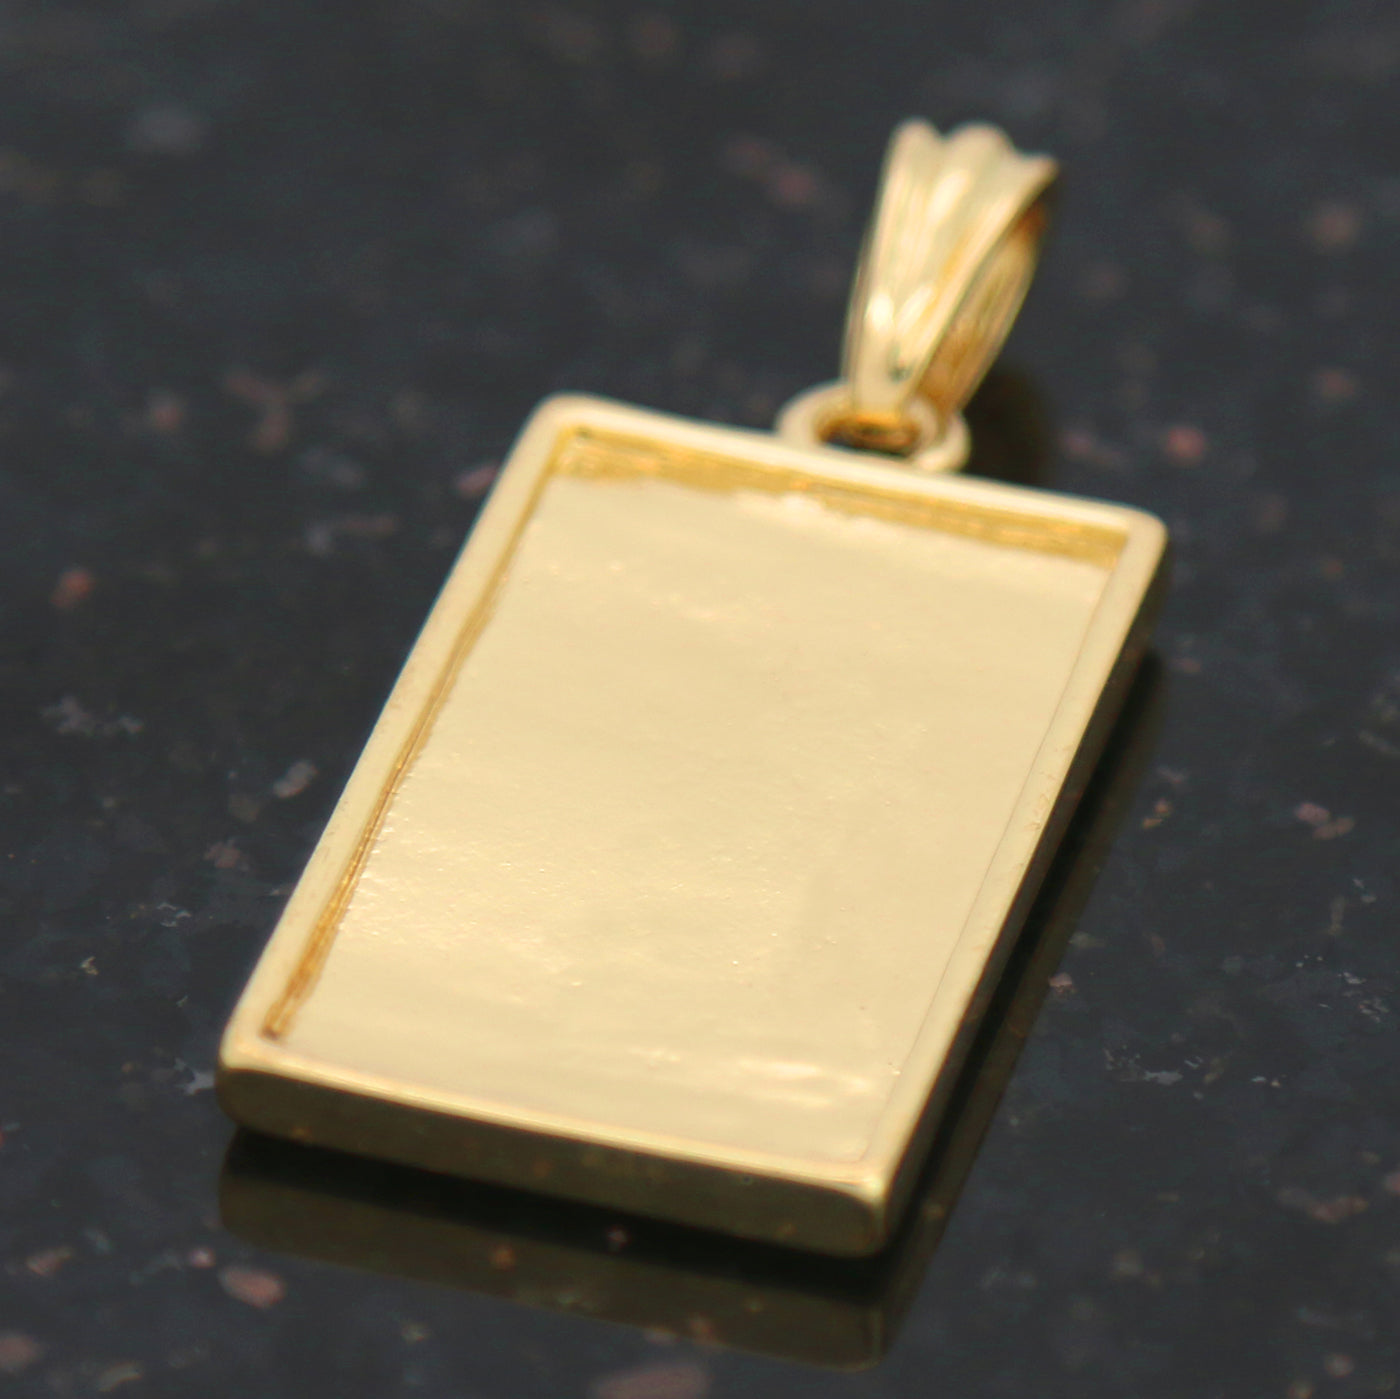 SUPREME Pendant with Gold Rope Chain